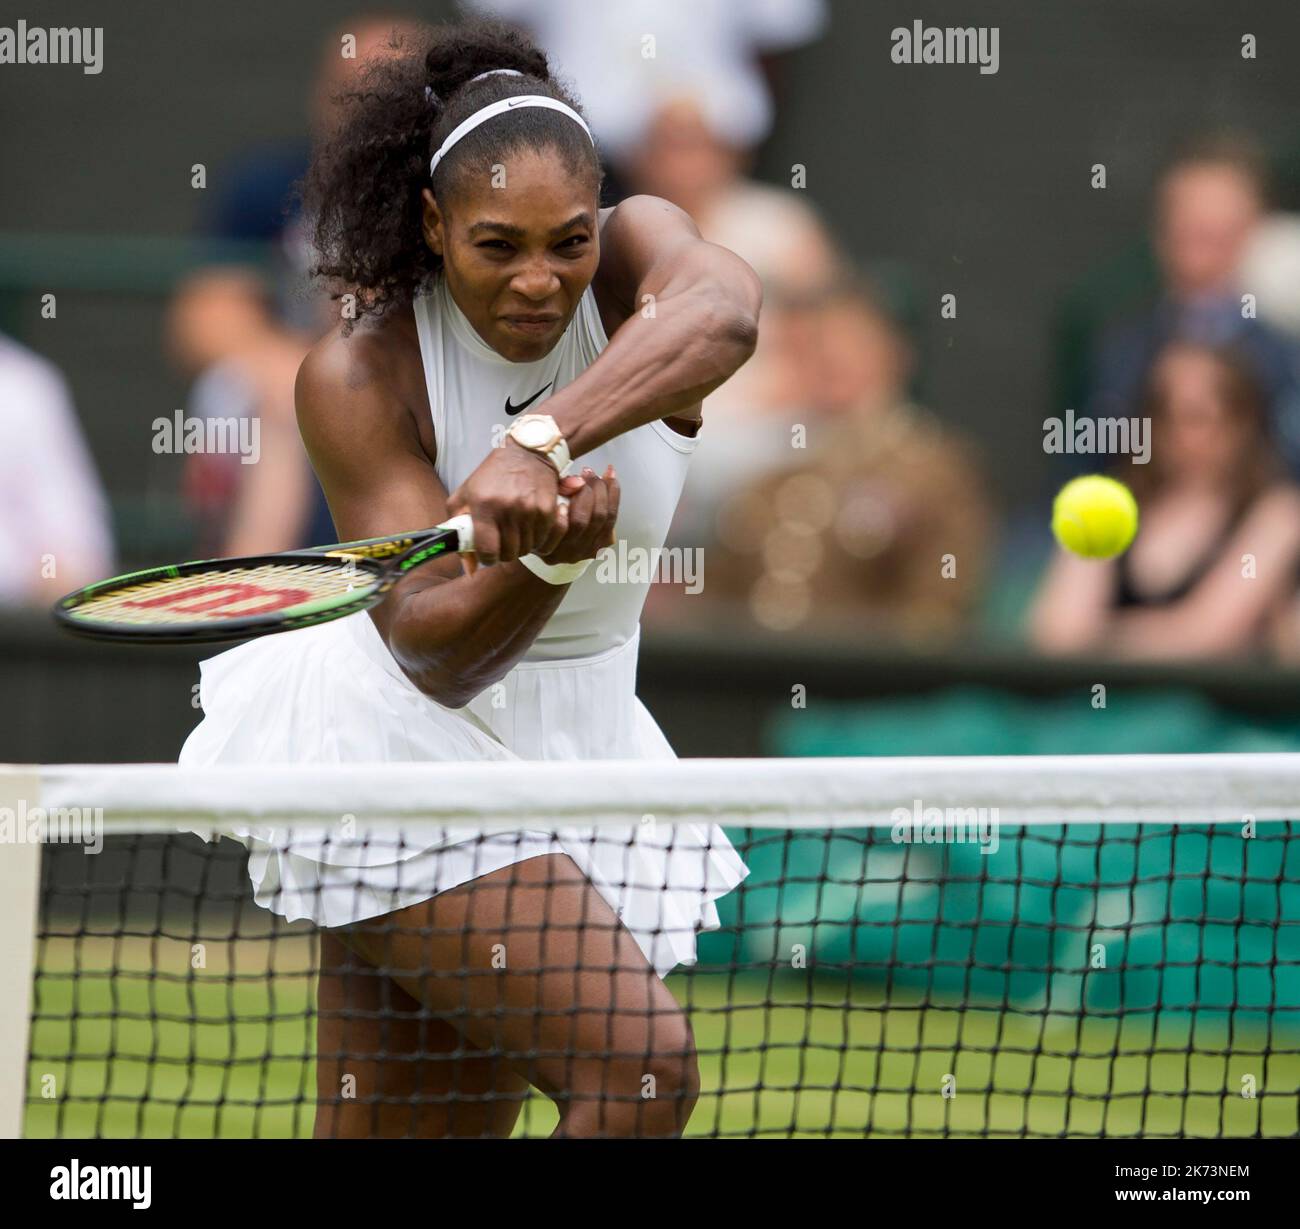 09/07/2016. Wimbledon 2016. Day 12, Centre Court, Women's Singles Final. Serena Williams (USA) v Angelique Kerber, (GER). Serena Williams  in action. Stock Photo